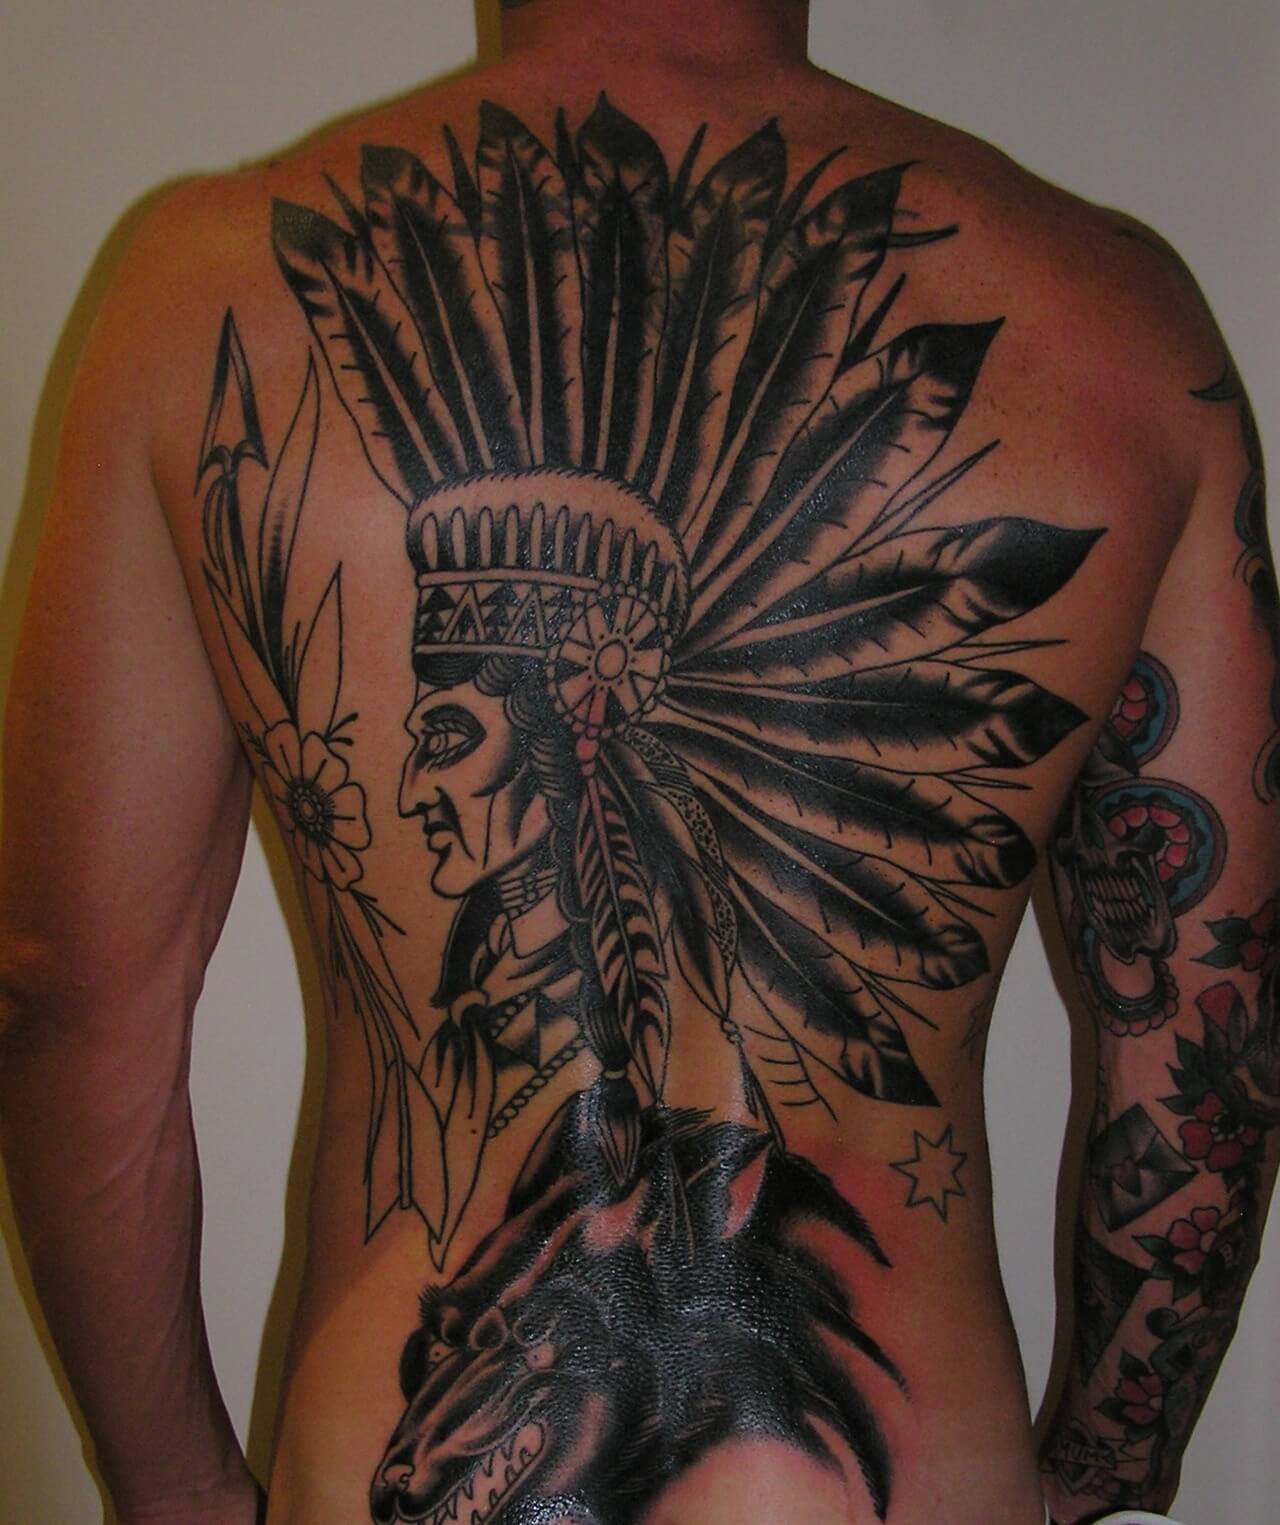 50 Tribal Tattoo Ideas - Style Yourself The Tribal Way